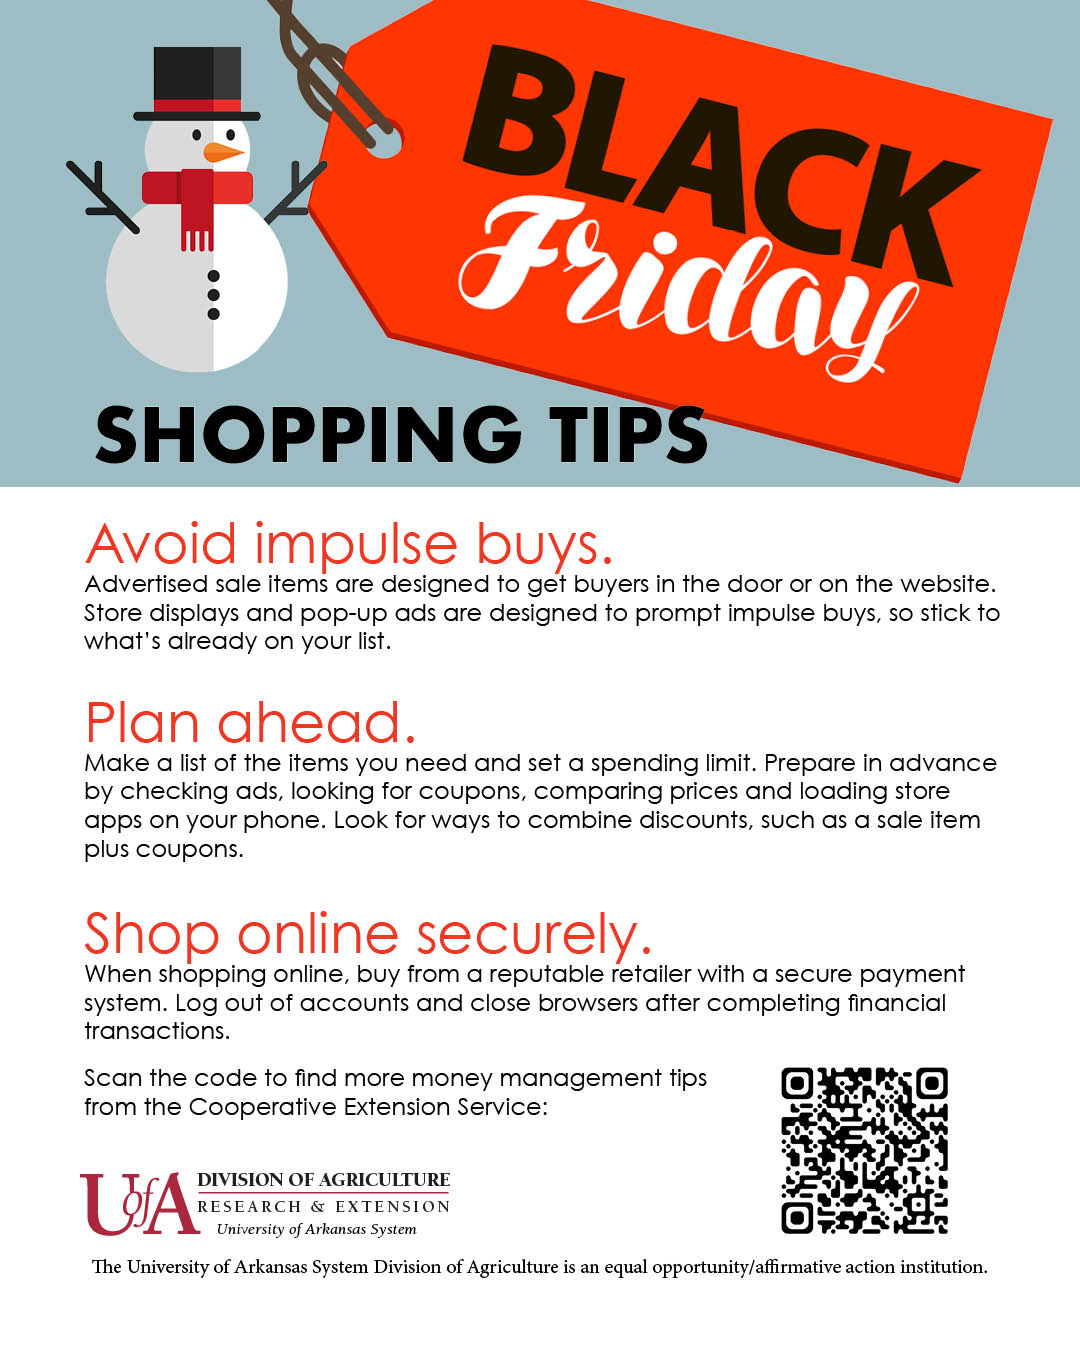 HOLIDAYS: When it comes to Black Friday shopping, plan ahead to get the  best deals